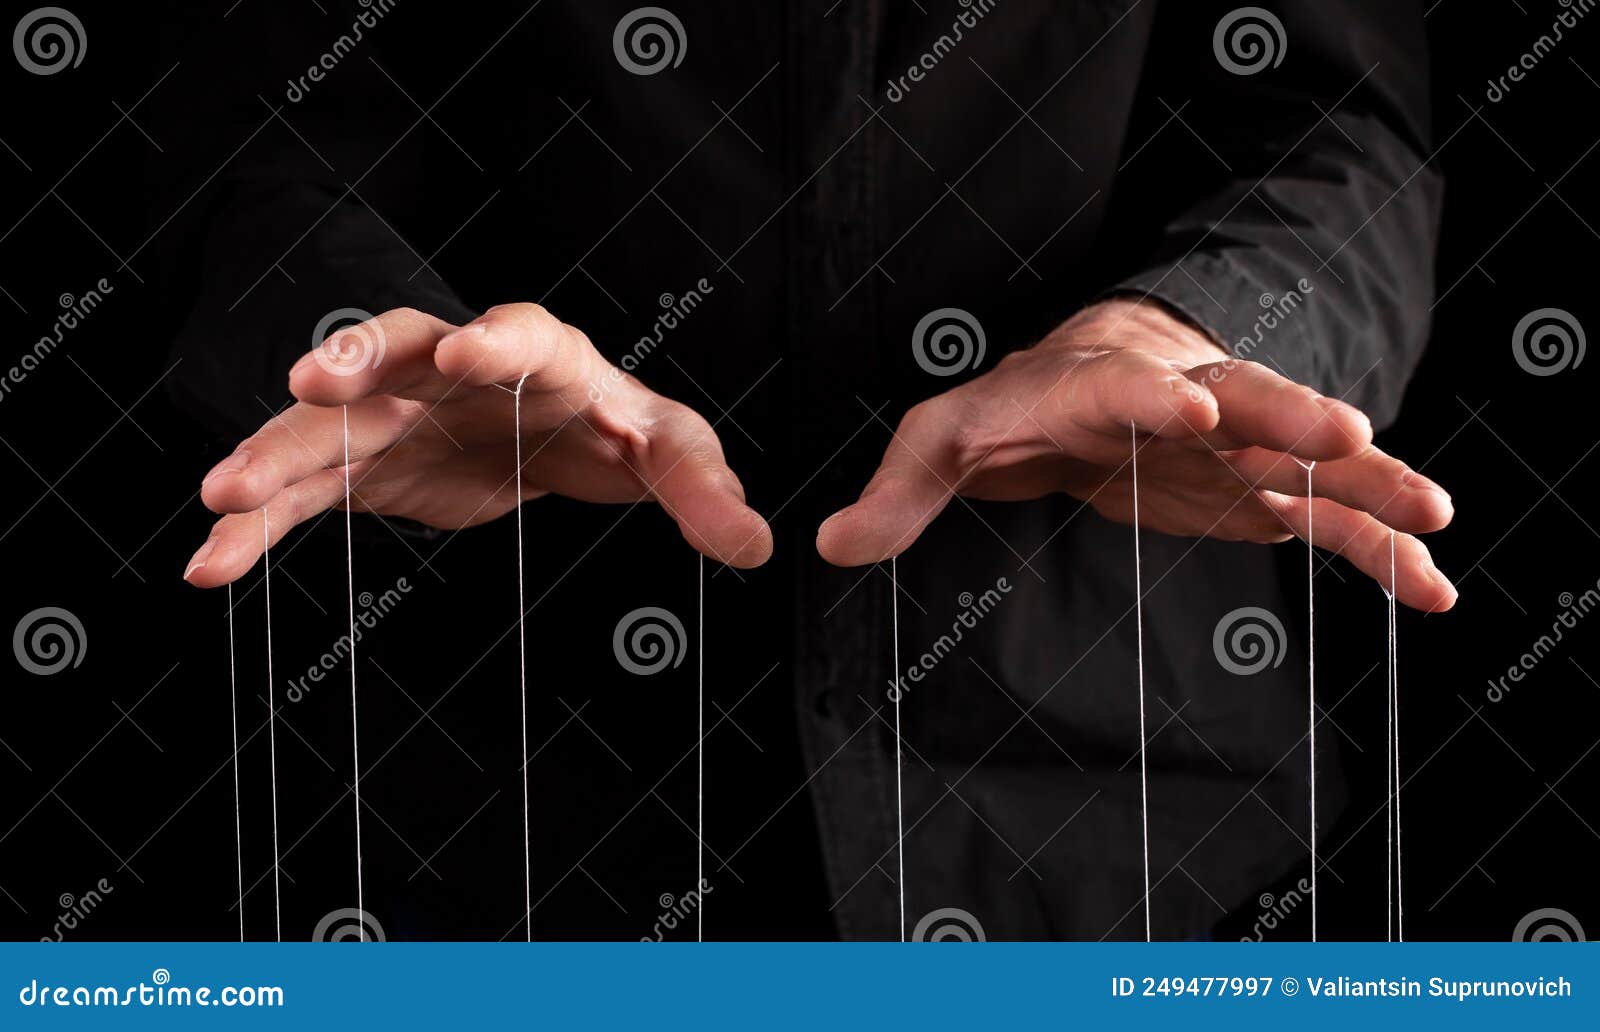 man hands with strings at fingers. manipulator controlling, exploiting person, showing power in relationship, at work